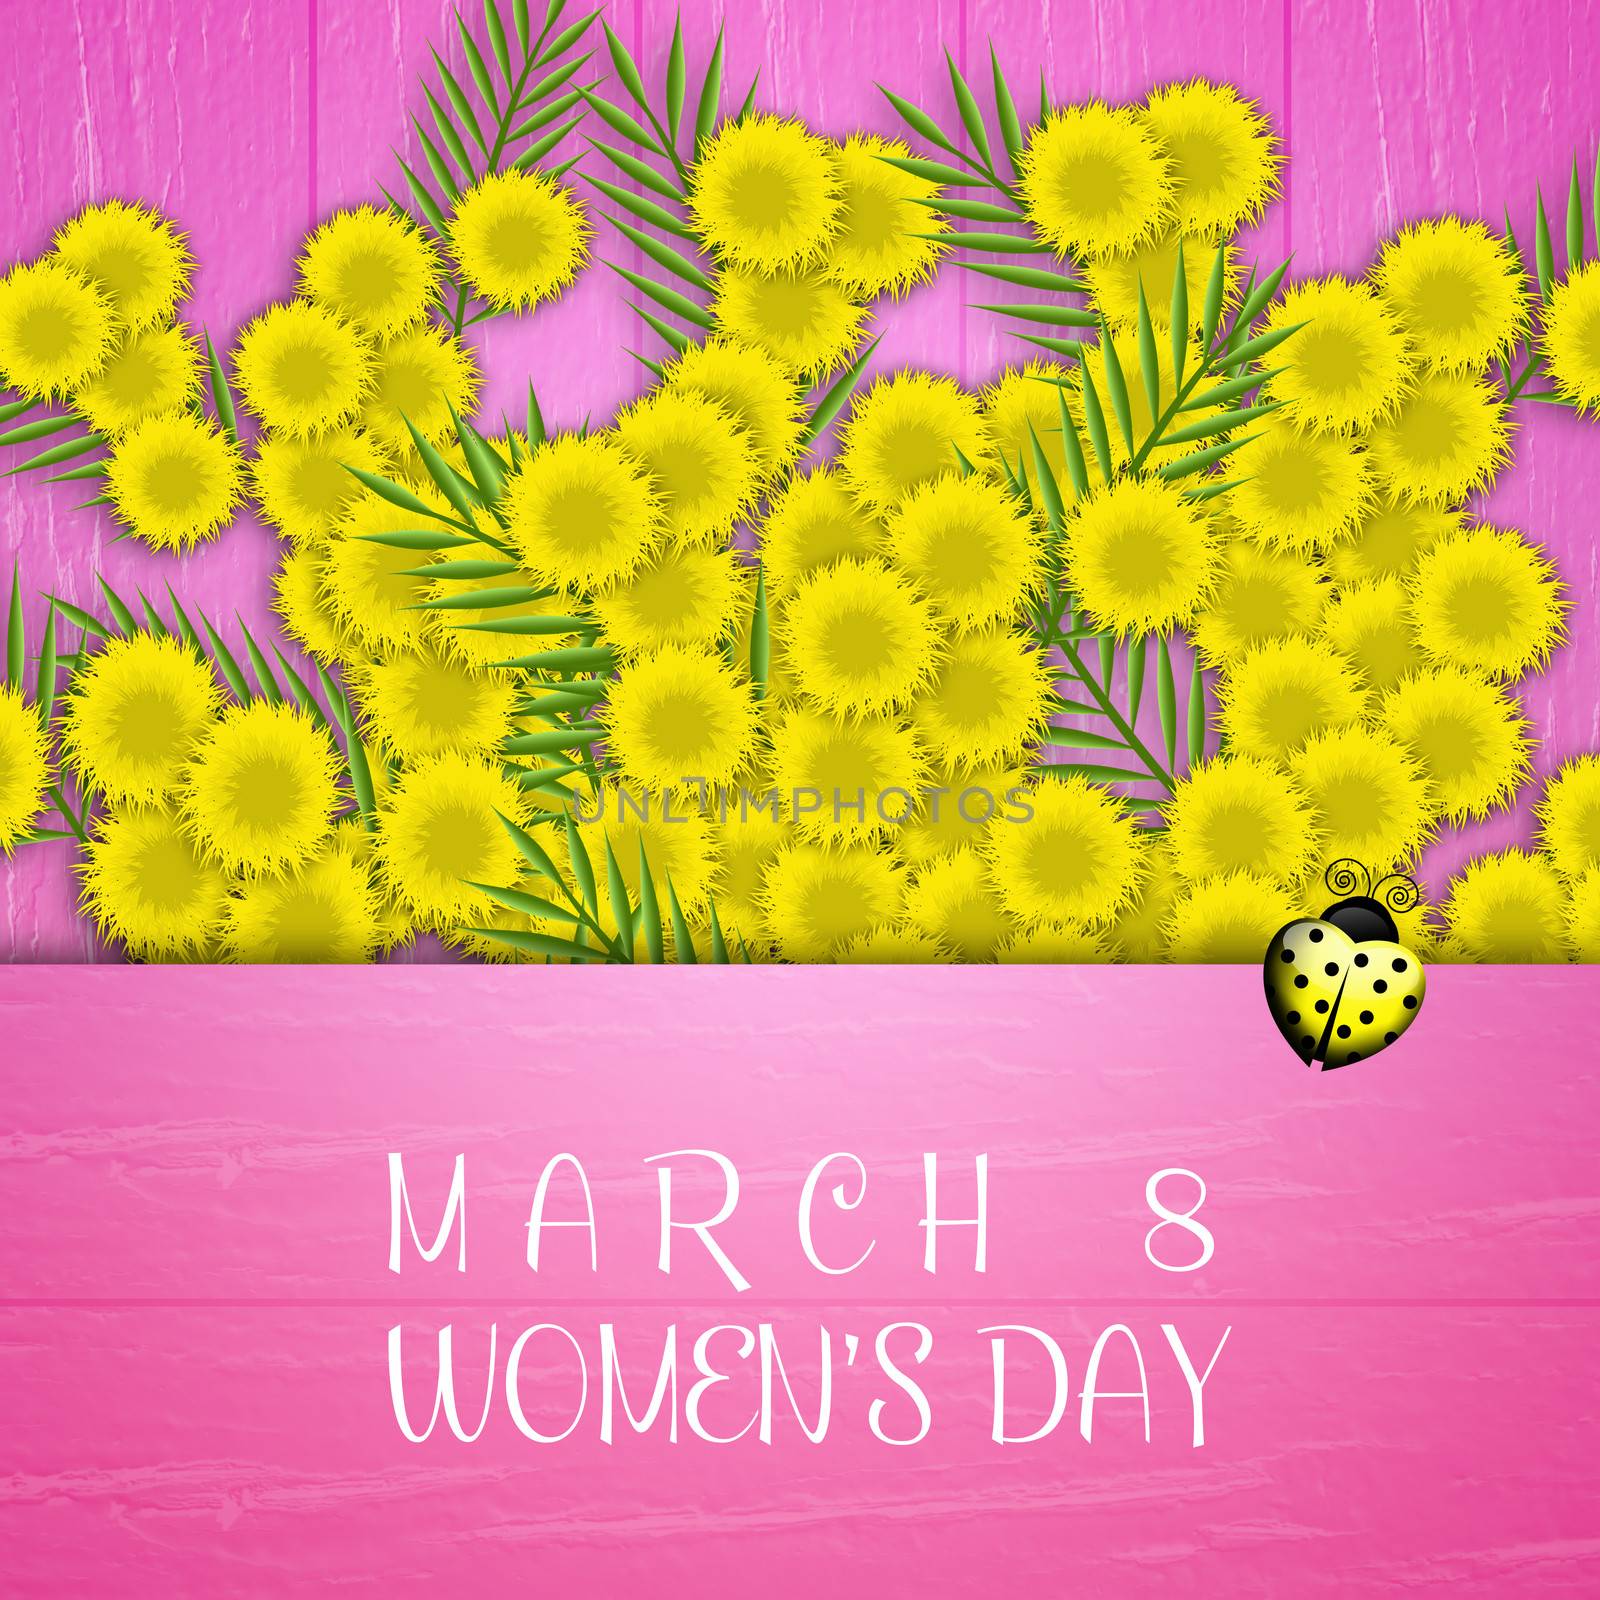 Mimosas for March 8 by sognolucido